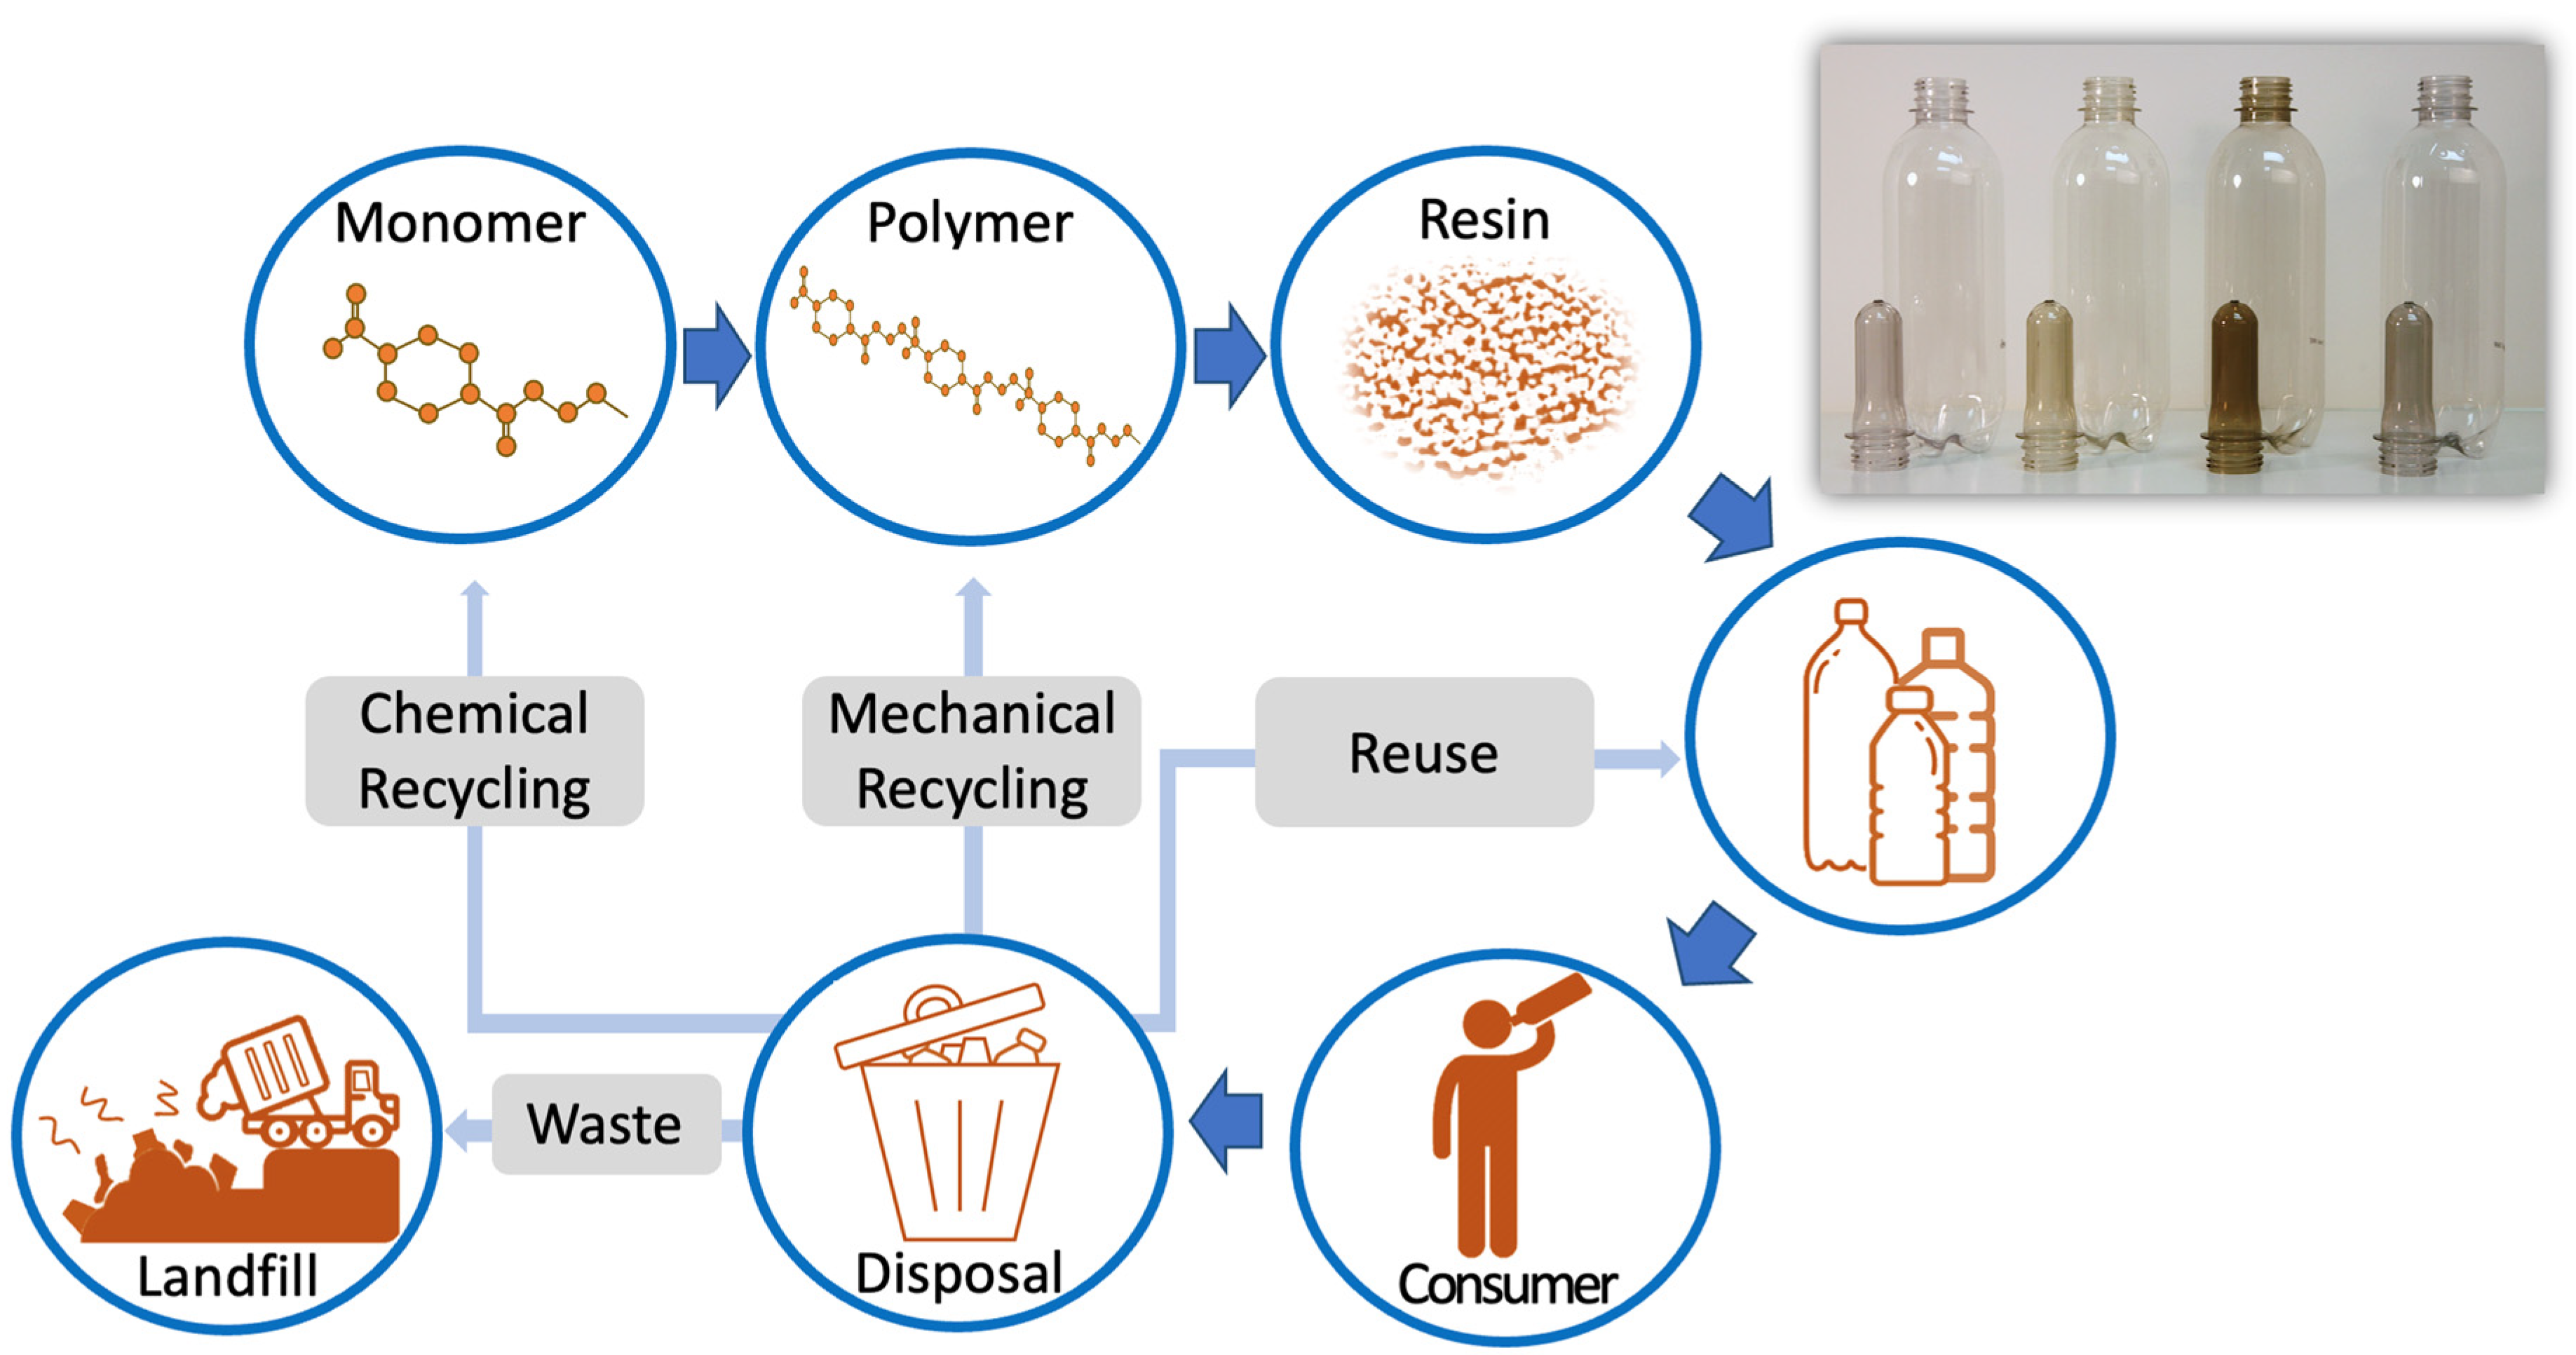 https://pub.mdpi-res.com/polymers/polymers-14-02366/article_deploy/html/images/polymers-14-02366-ag.png?1655194014